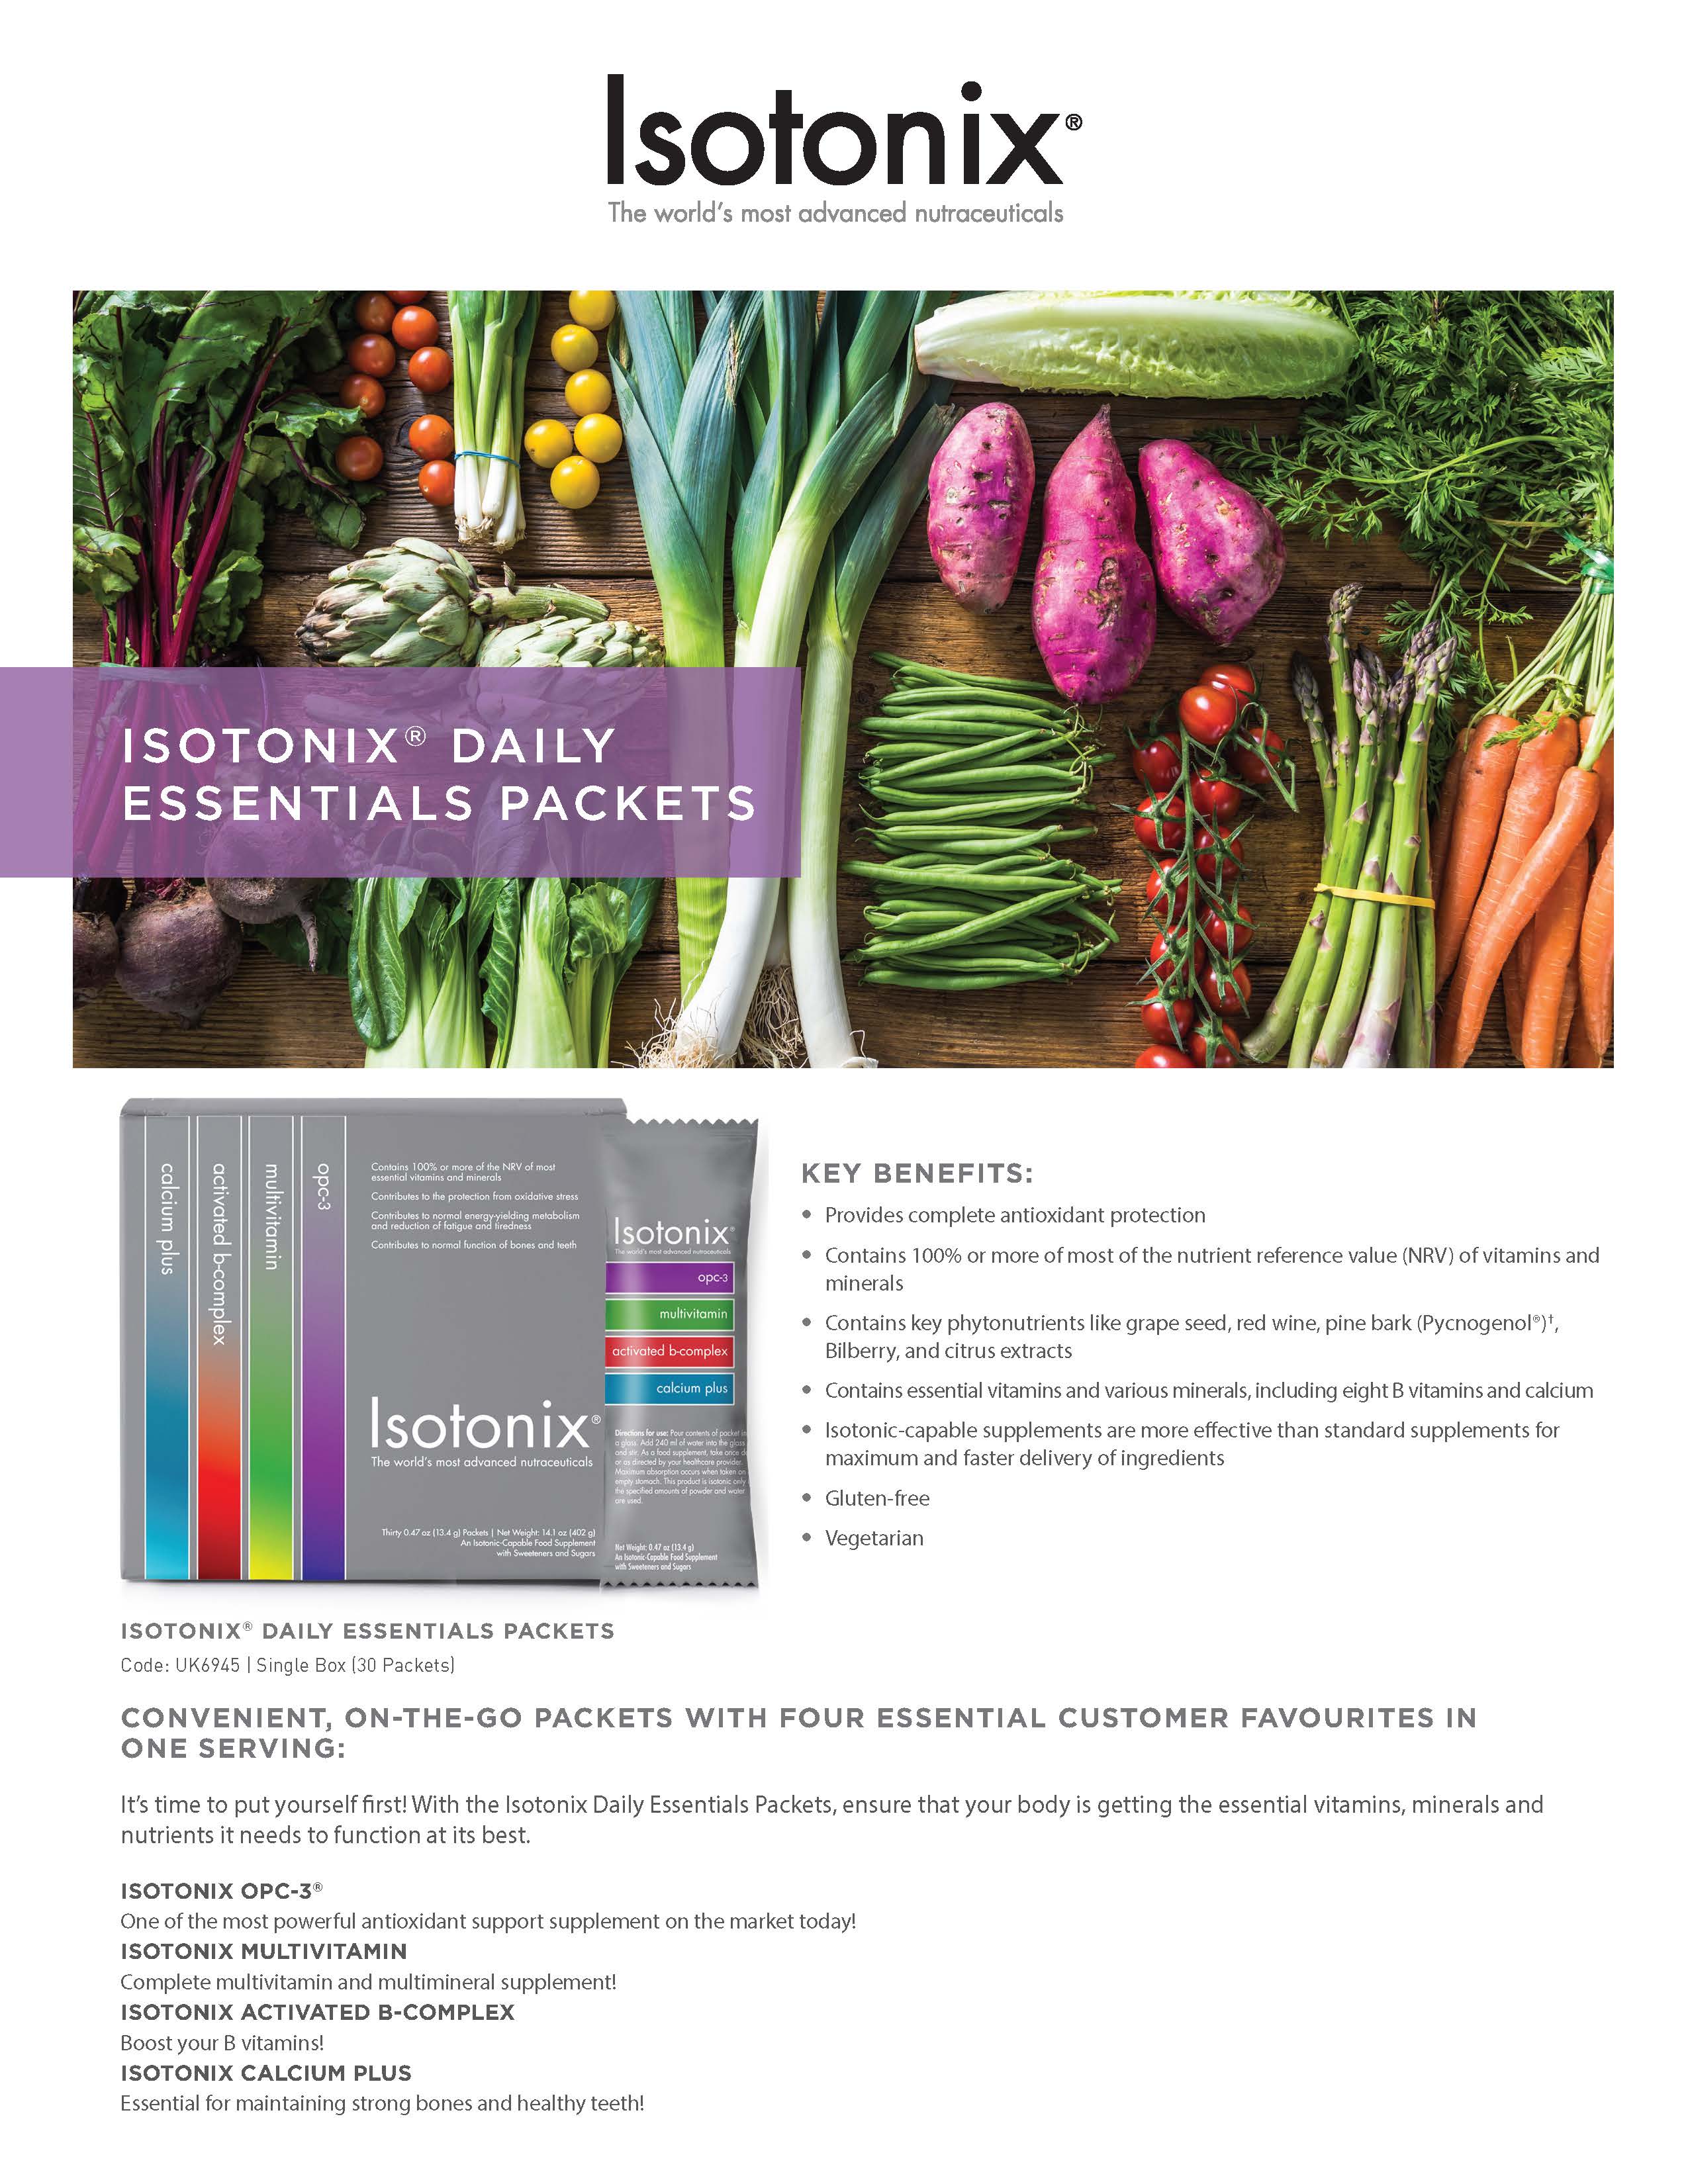 Why Isotonix Daily Essentials Packets are the best!